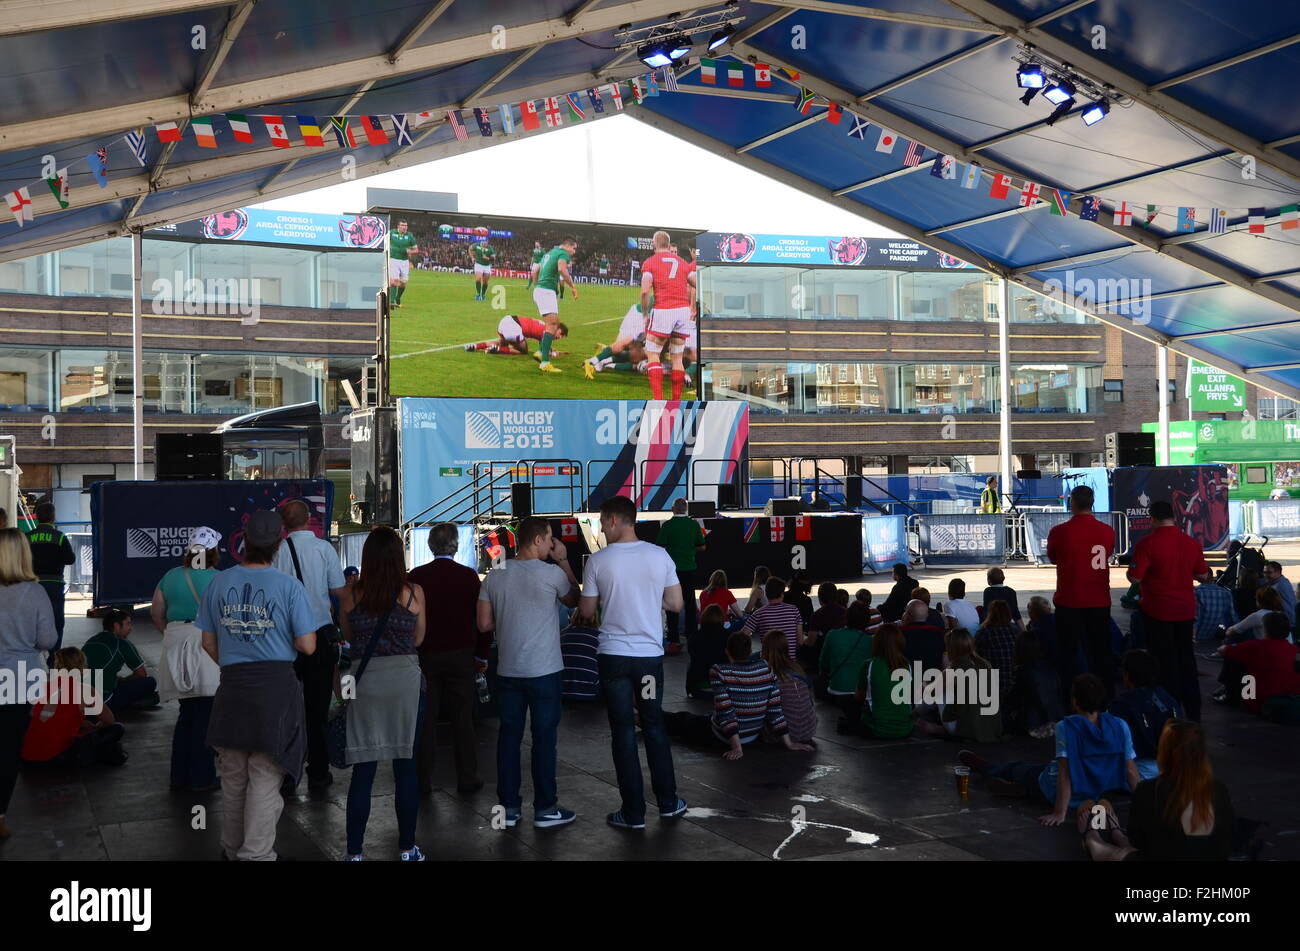 Cardiff Rugby World Cup 2015 finali Foto Stock